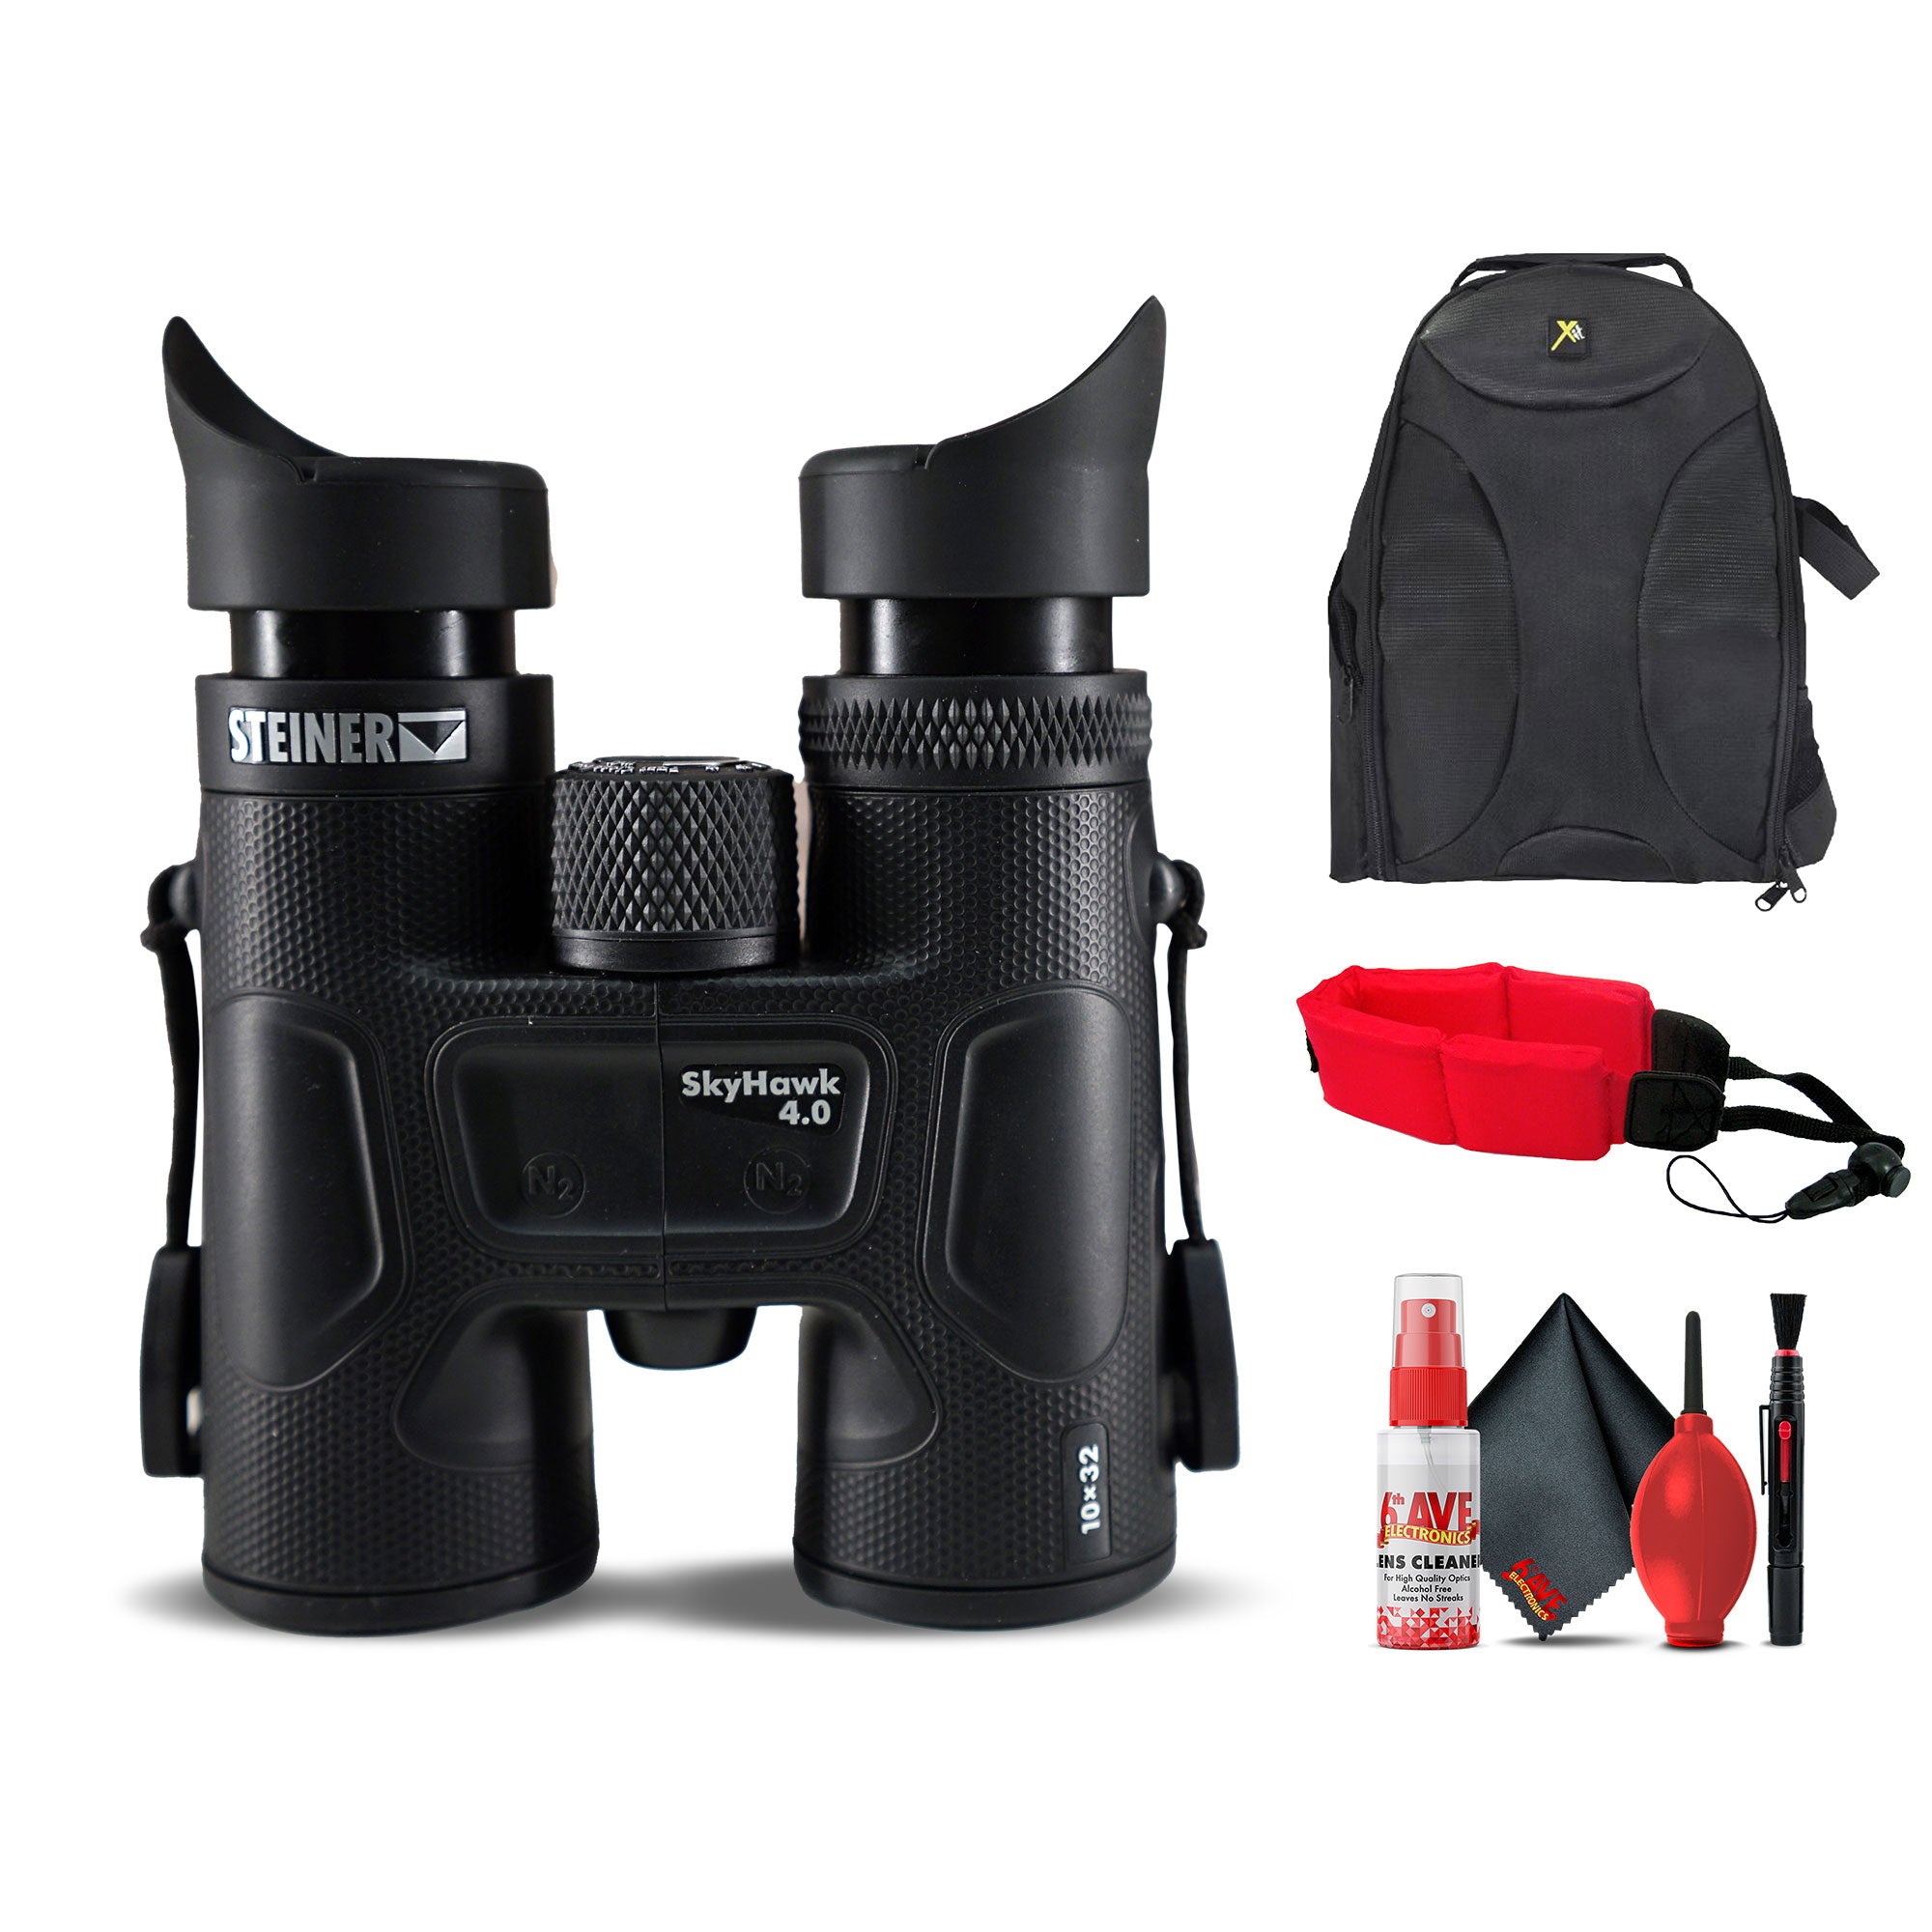 Steiner SkyHawk 4.0 10x32 Binoculars (23370900) Bundle with Padded Backpack, Floating Wrist Strap, and 6Ave Cleaning Kit